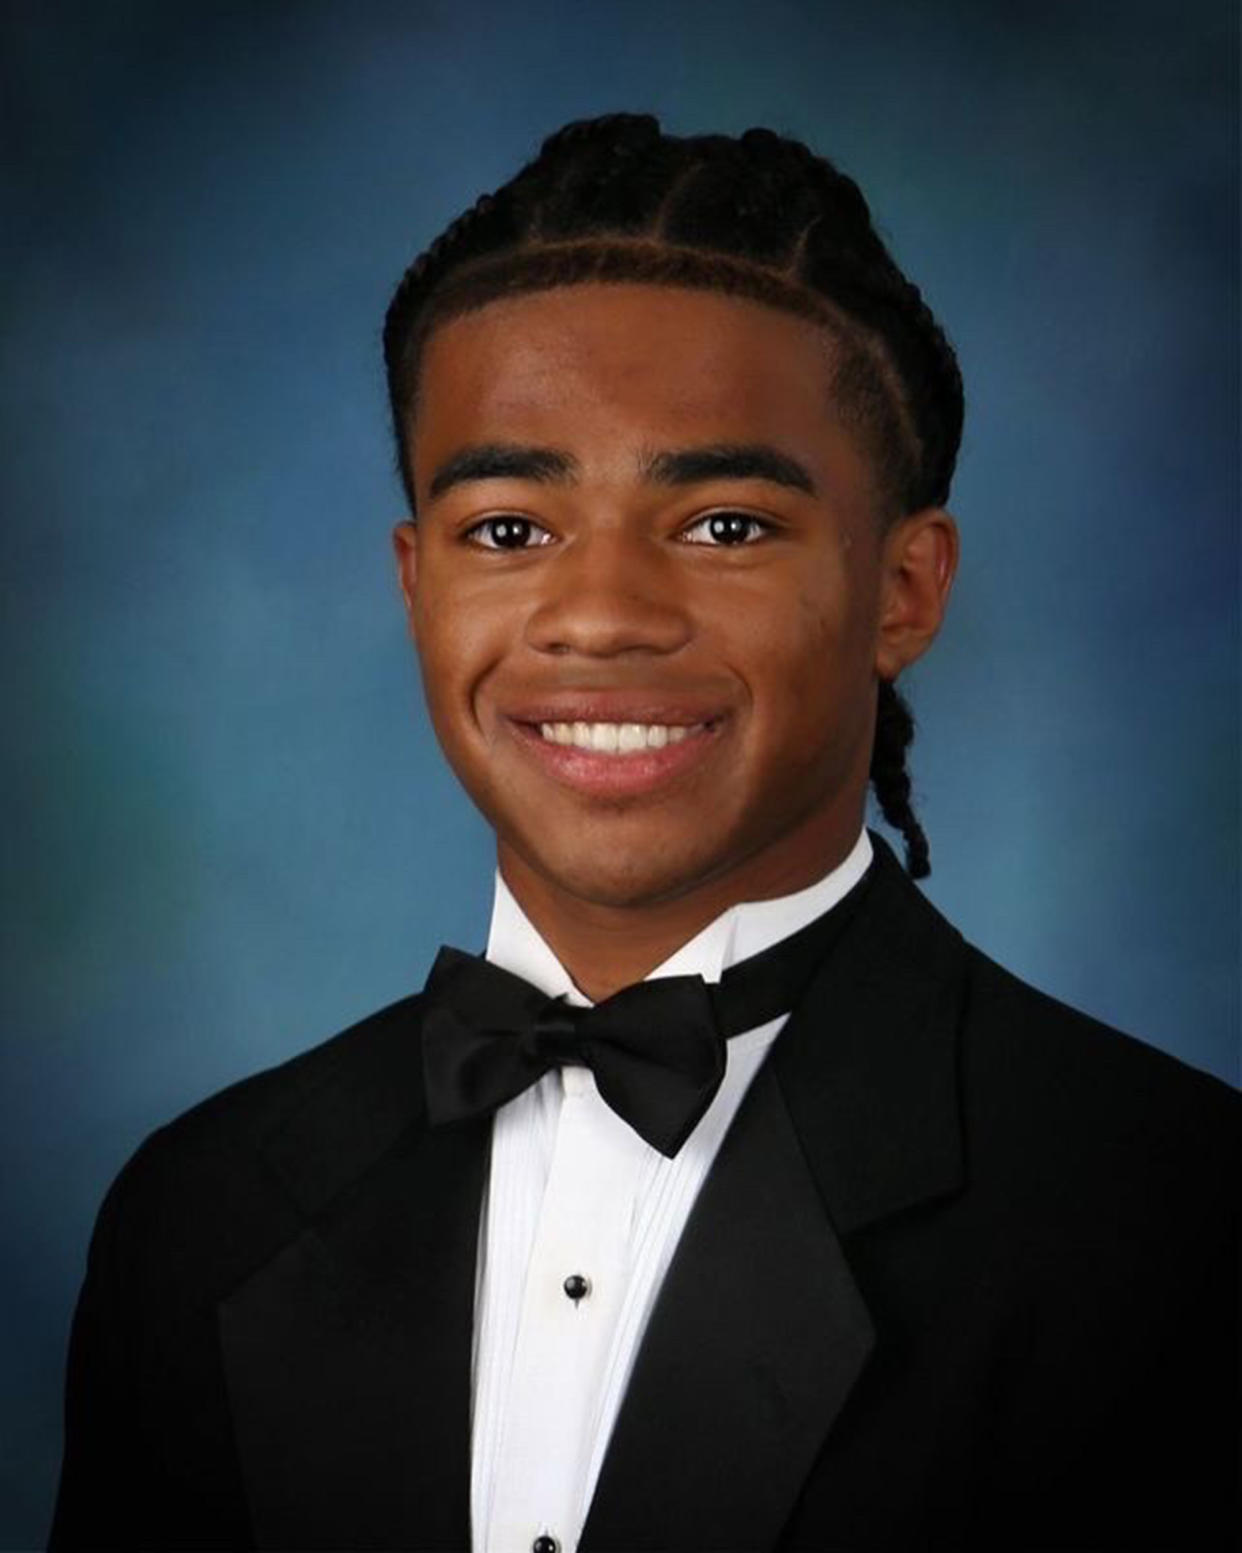 Ahmed Muhammad is the first Black male valedictorian in his school's history. (Courtesy Ahmed Muhammad)